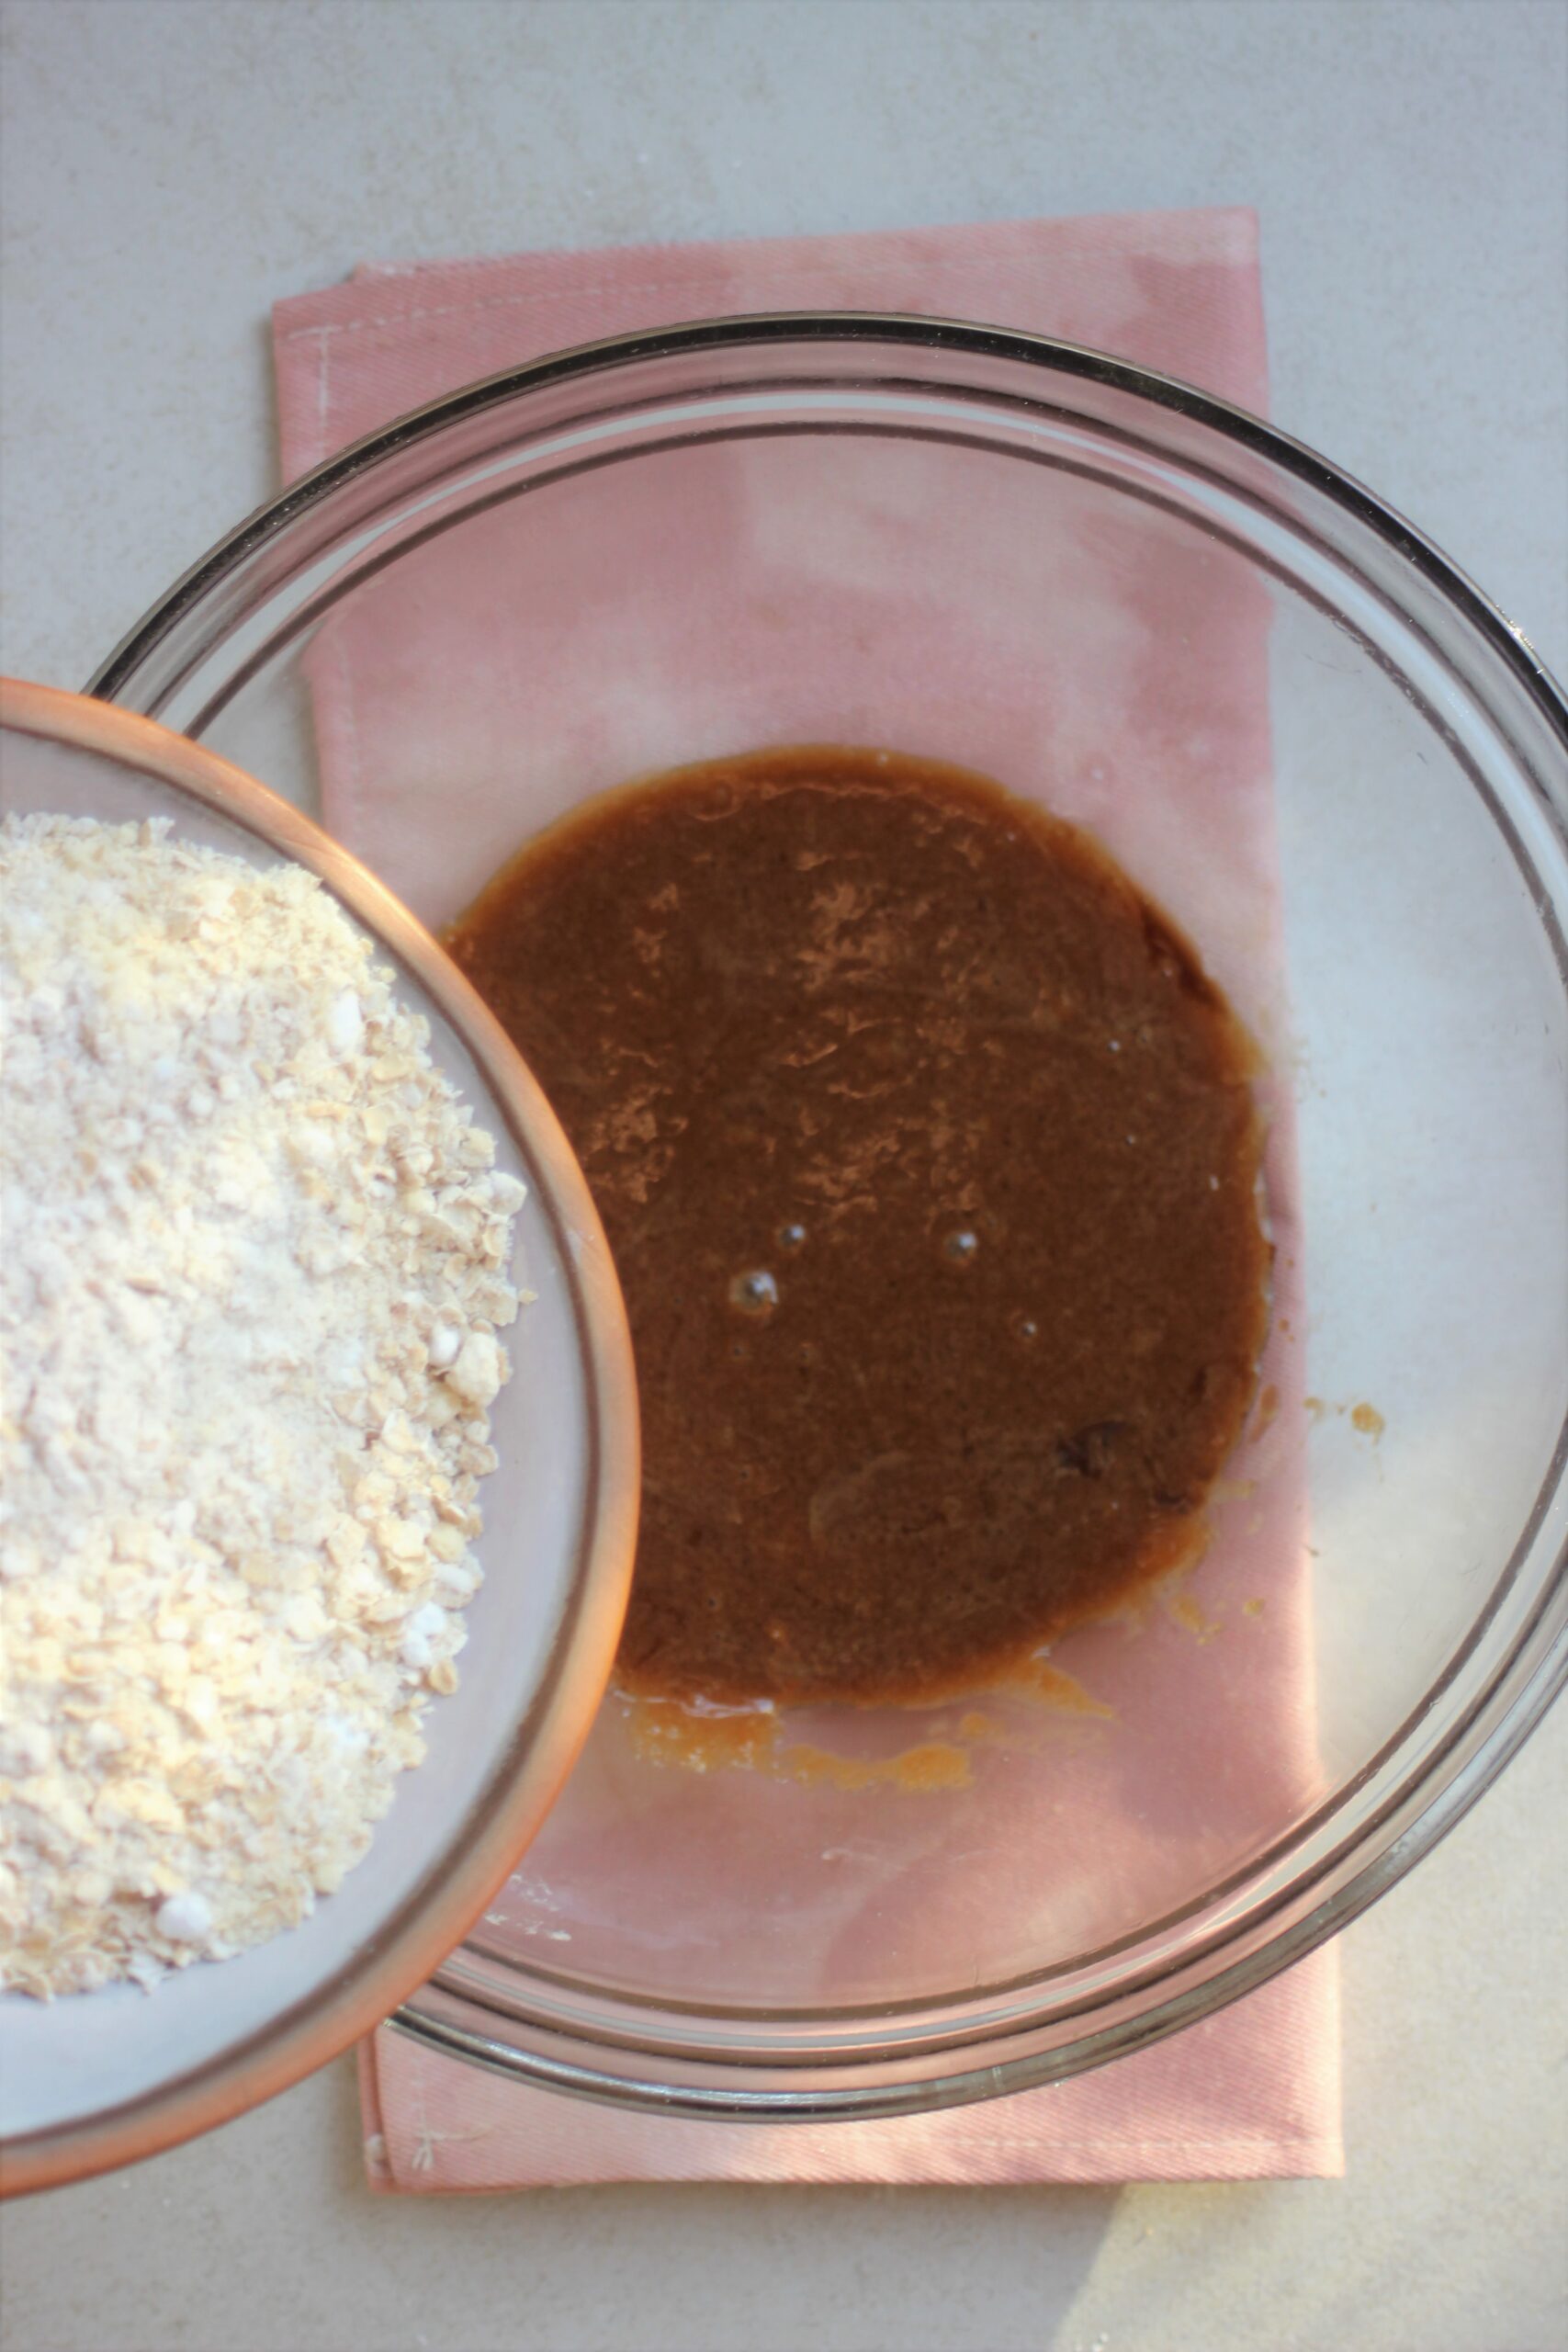 A plate with flour is about to be poured into a glass bowl with brown mixture.